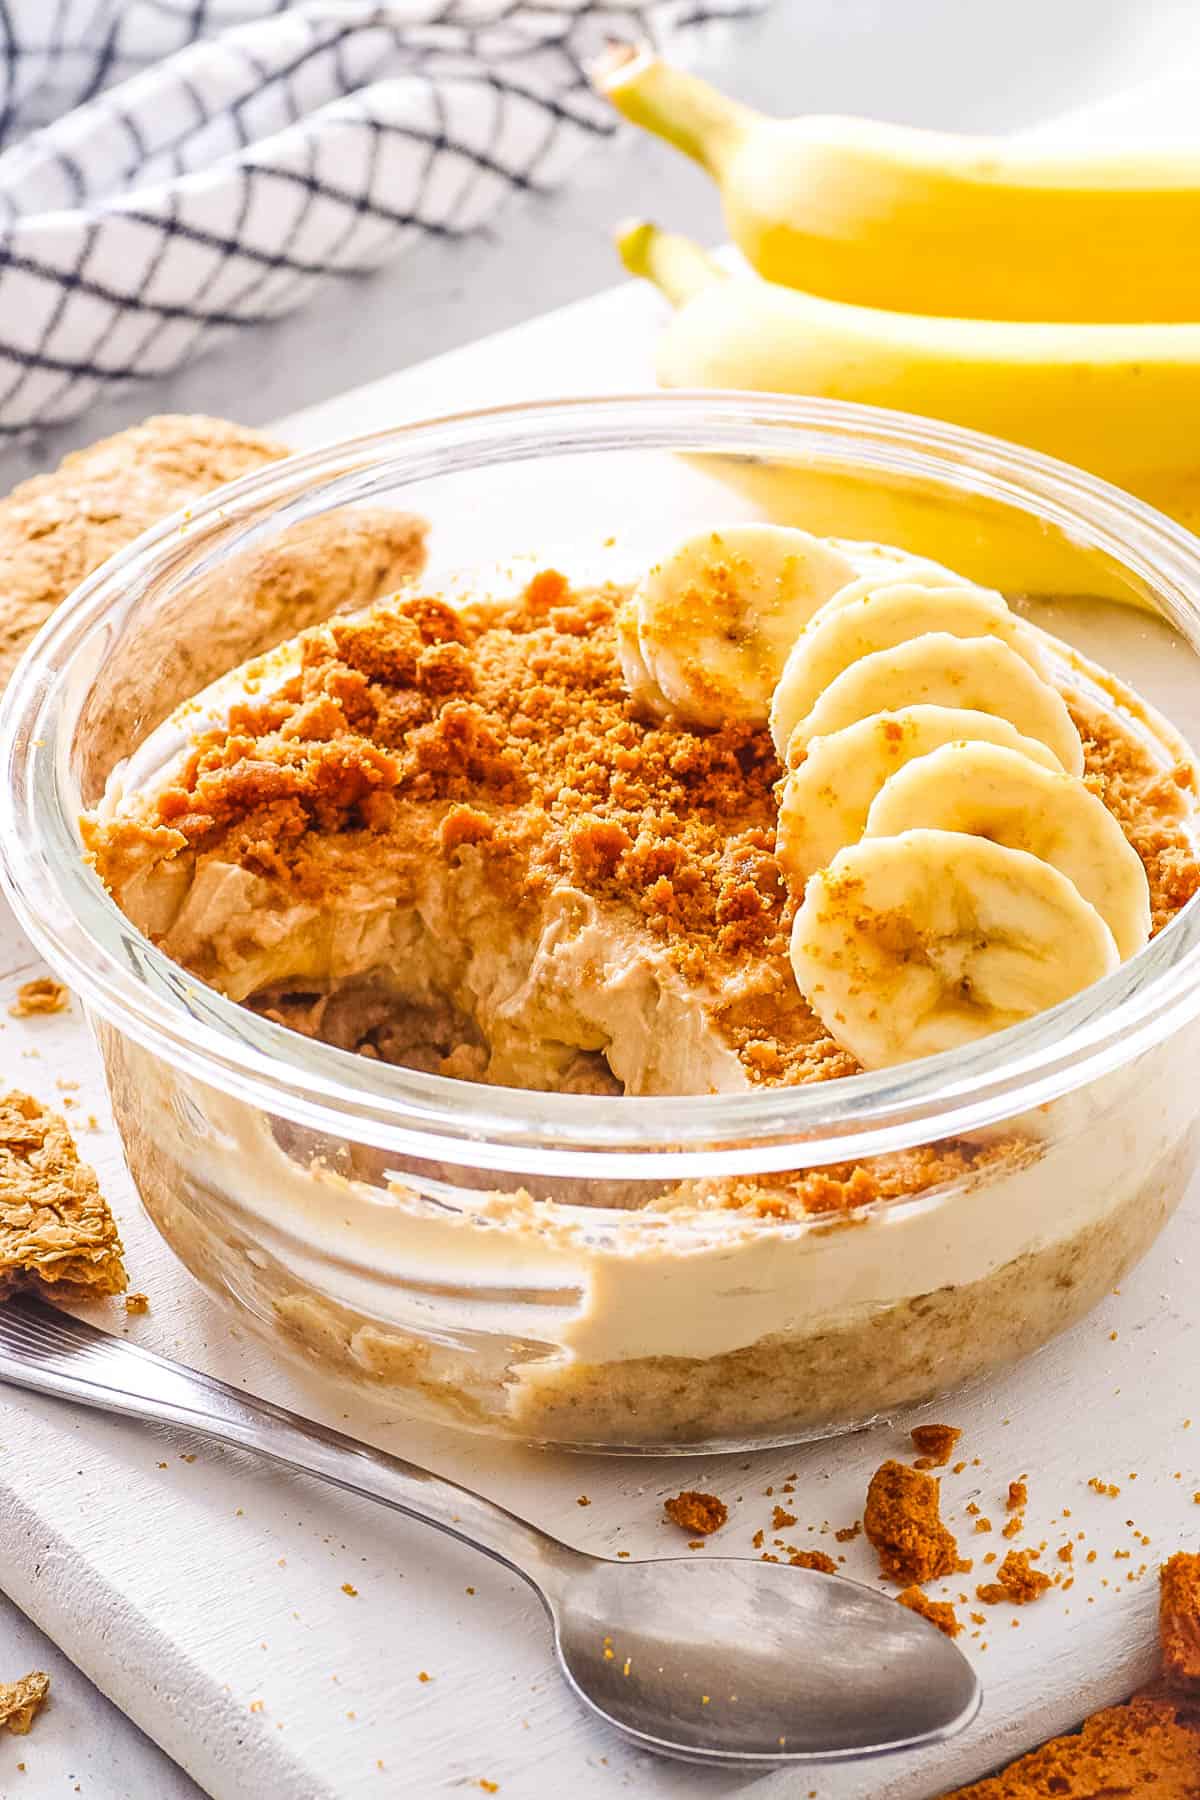 Easy overnight Weetabix, topped with sliced bananas, served in a gl، bowl.